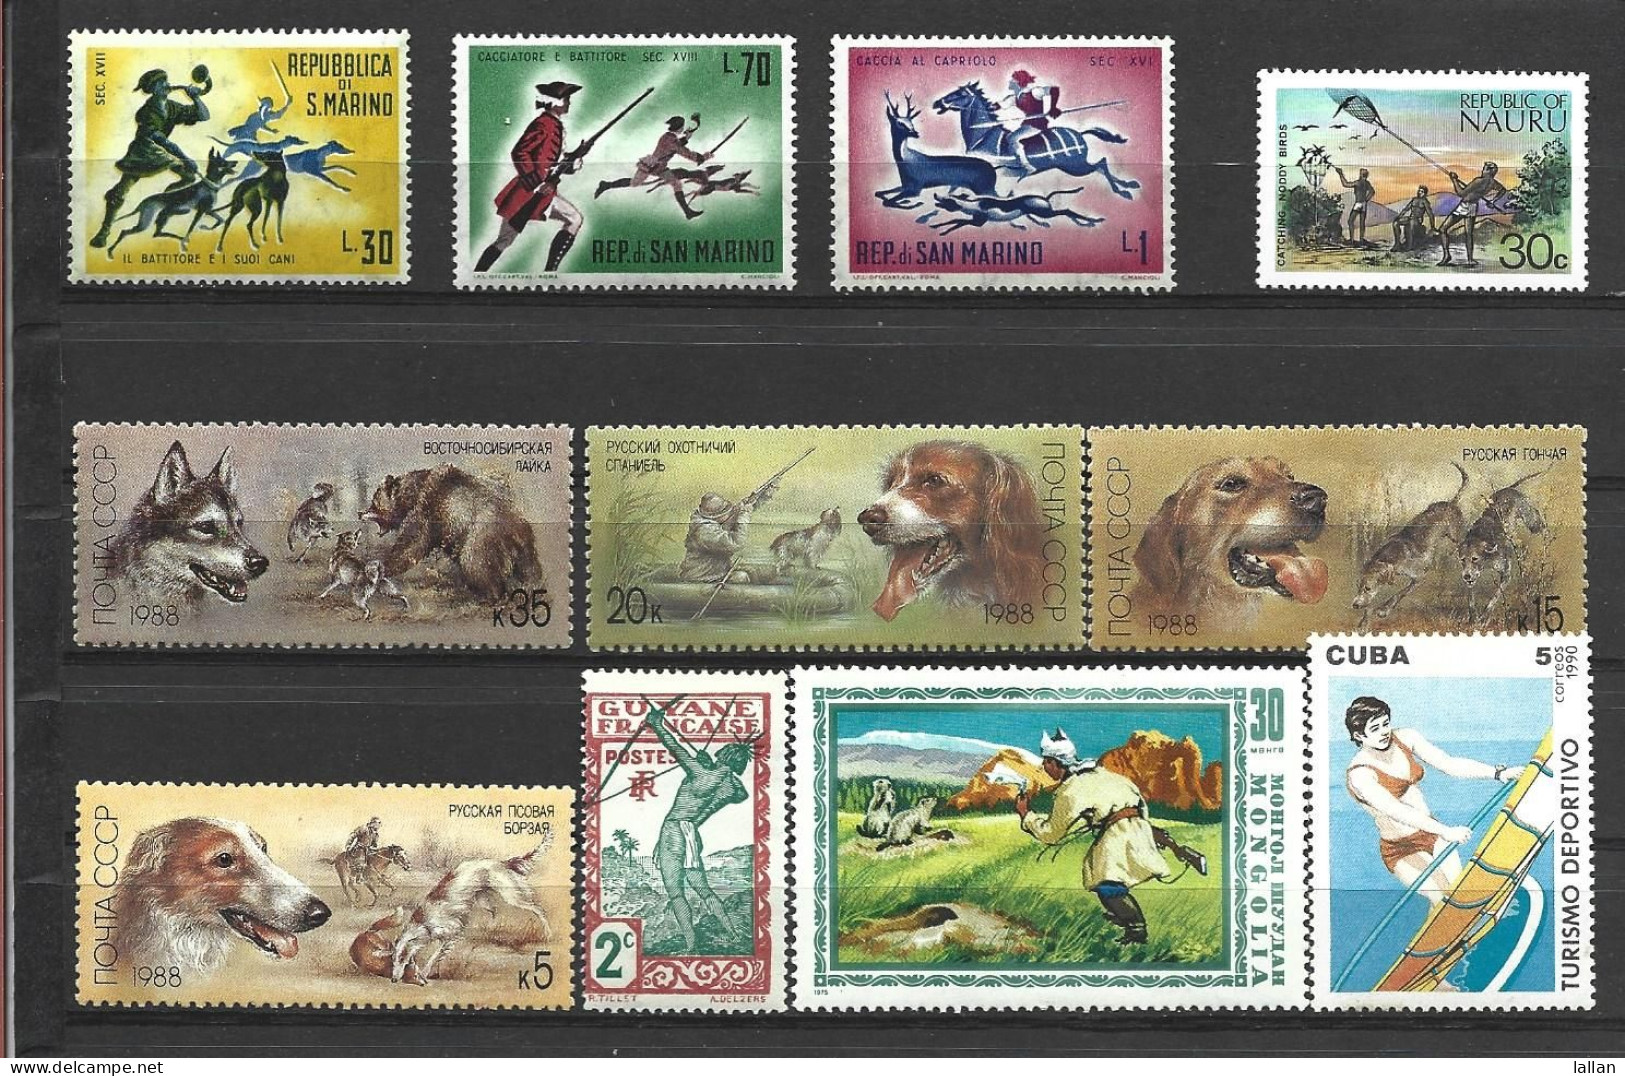 Collection Of 31 Stamps, Hunting, Fishing, And Boating, MNH, Some Disturbed Gum, Condition As Per Front/back Scan - Tiro (armi)